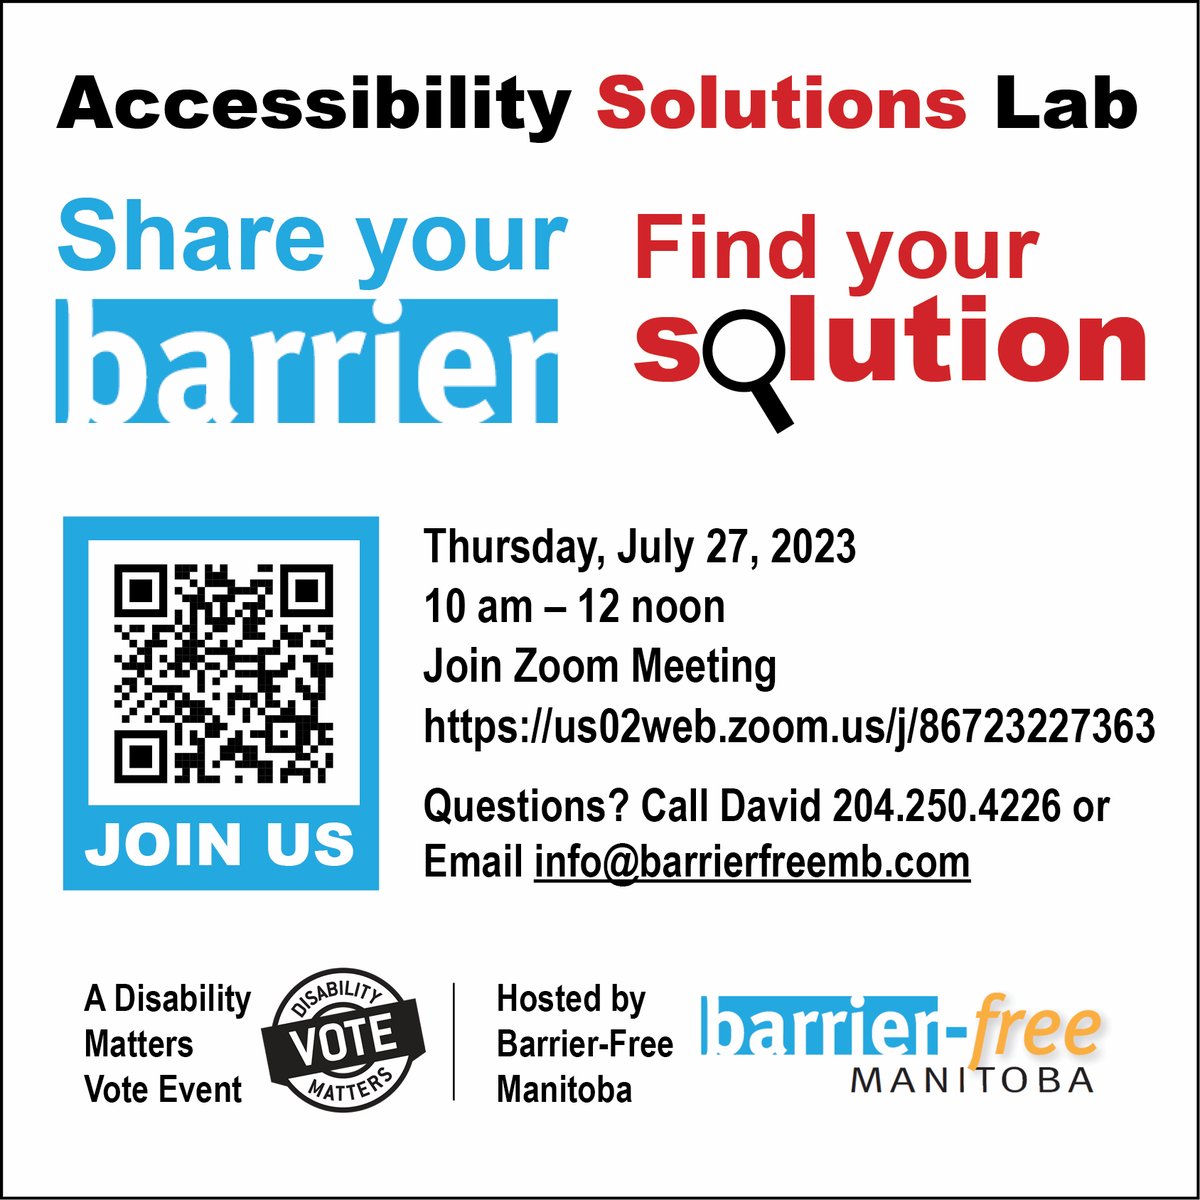 Join us virtually to crowd-source solutions at our Accessibility Solutions Lab
Thursday, July 27th, 2023 from 10 a.m. to 12 noon
Join Zoom meeting via this link - https://t.co/uC8UYzaXZA
For more information, please see our Facebook post!
#DMVote https://t.co/z444WDkBdE